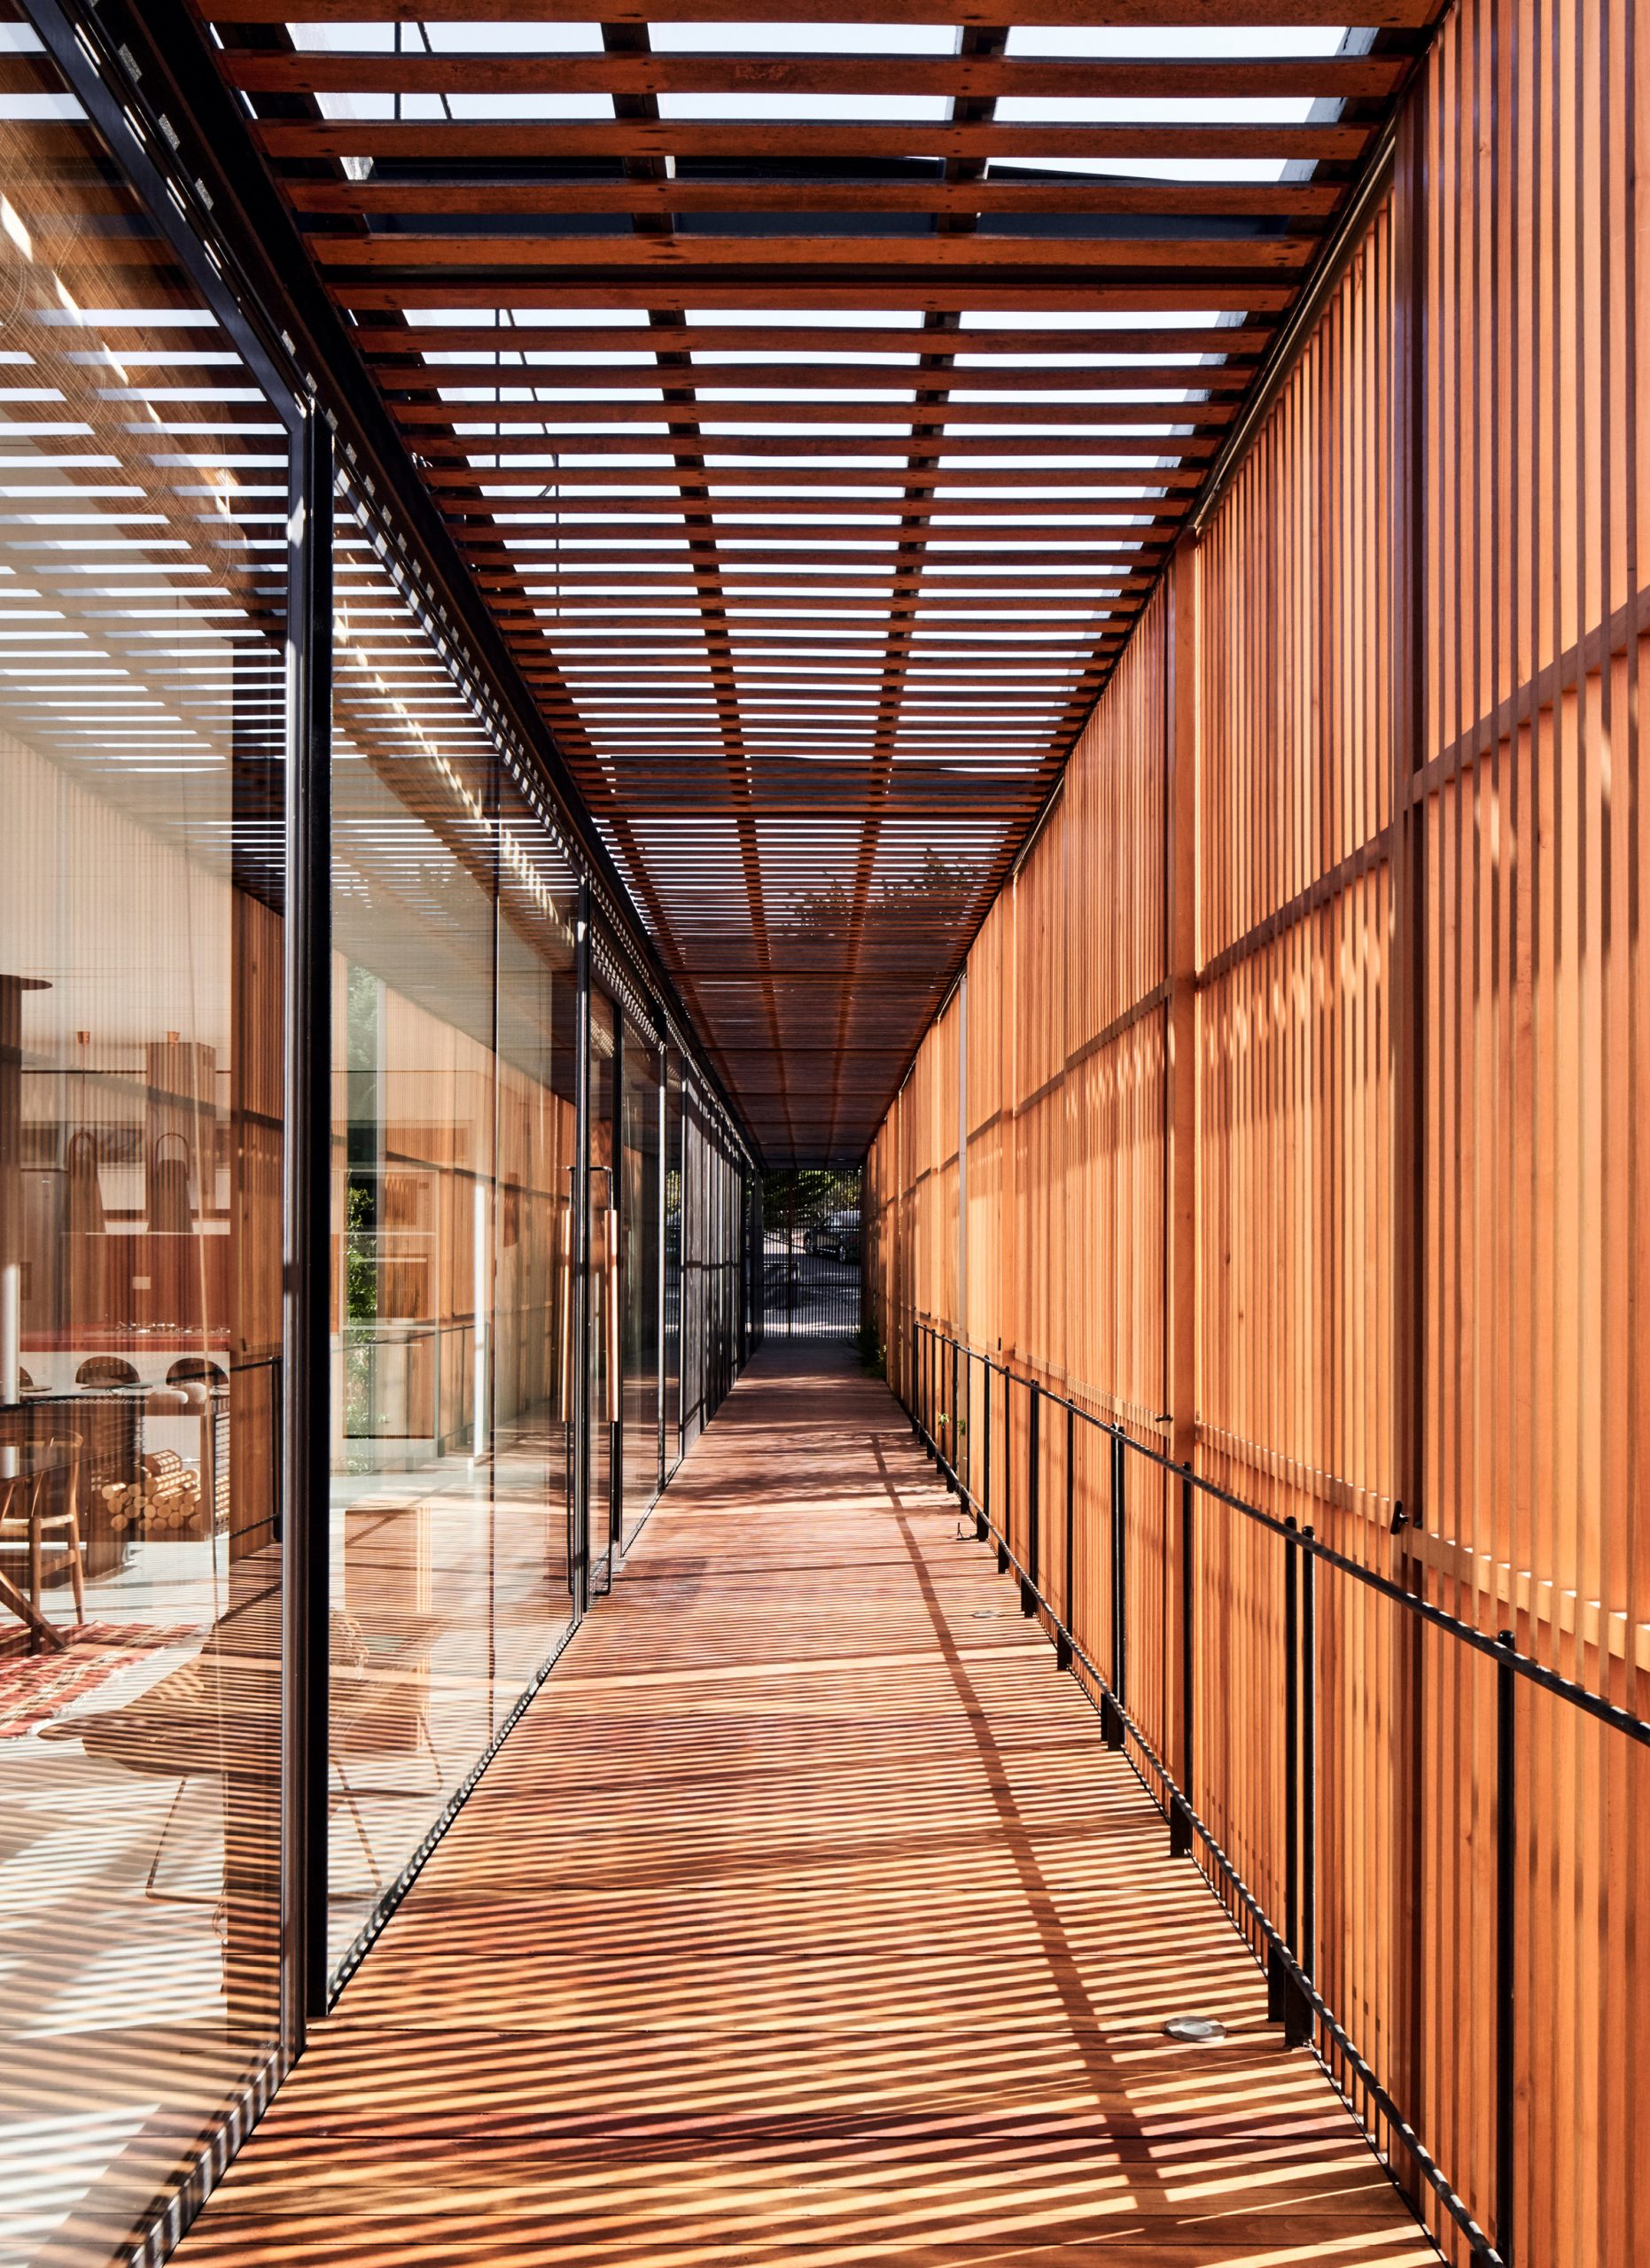 Walkway in Engawa House by Santiago Valdivieso and Stefano Rolla